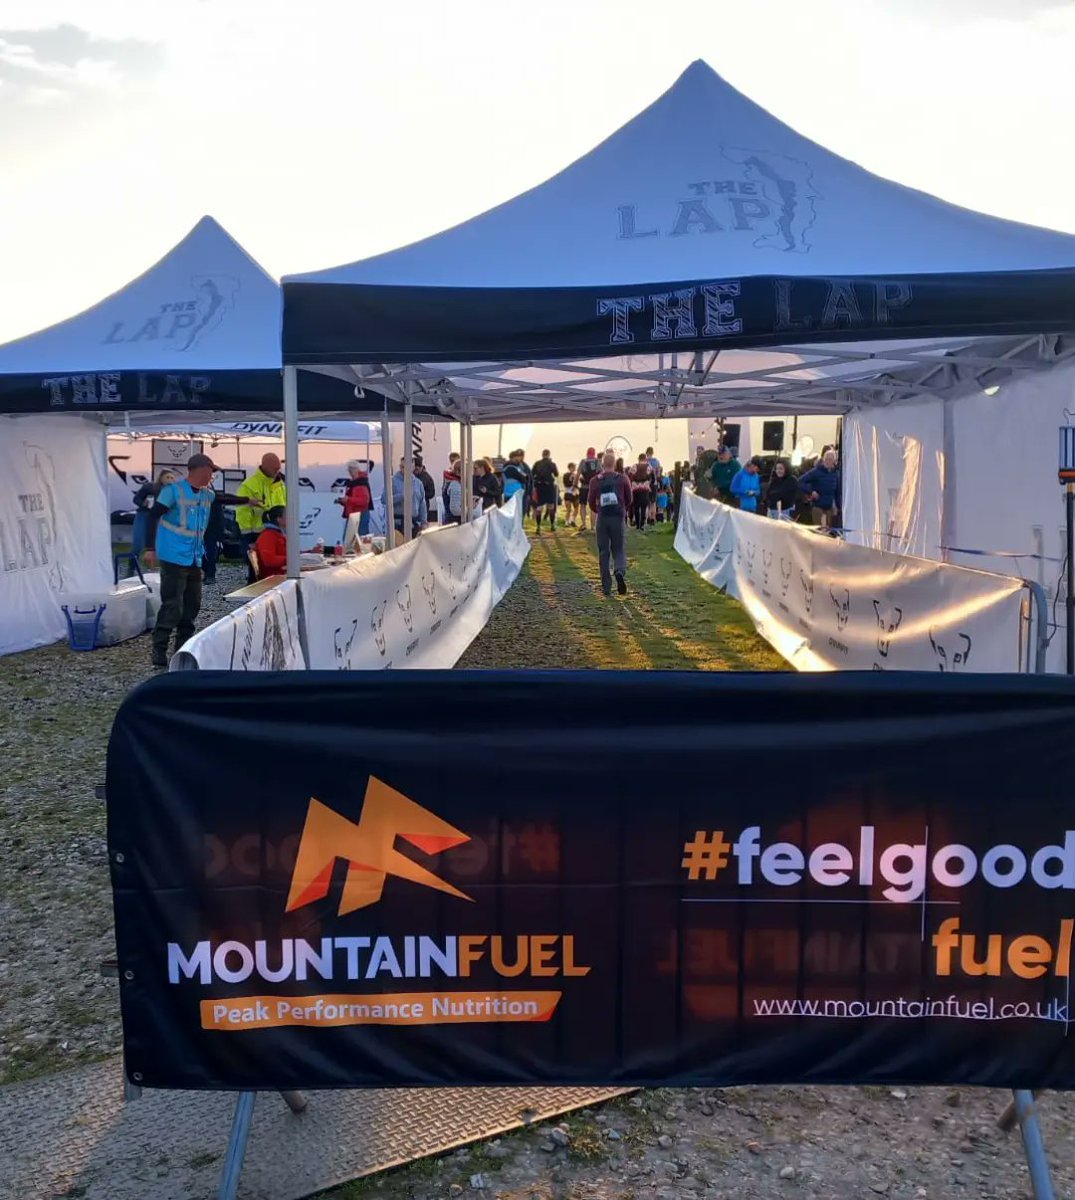 Well done to all who ran The Lap, Windermere this weekend👏 We loved being a part of it catching up, fuelling your race, and cheering you on through what were some HOT conditions🥵🌞

If you ran, share your photos and stories with us. We'd love to celebrate!